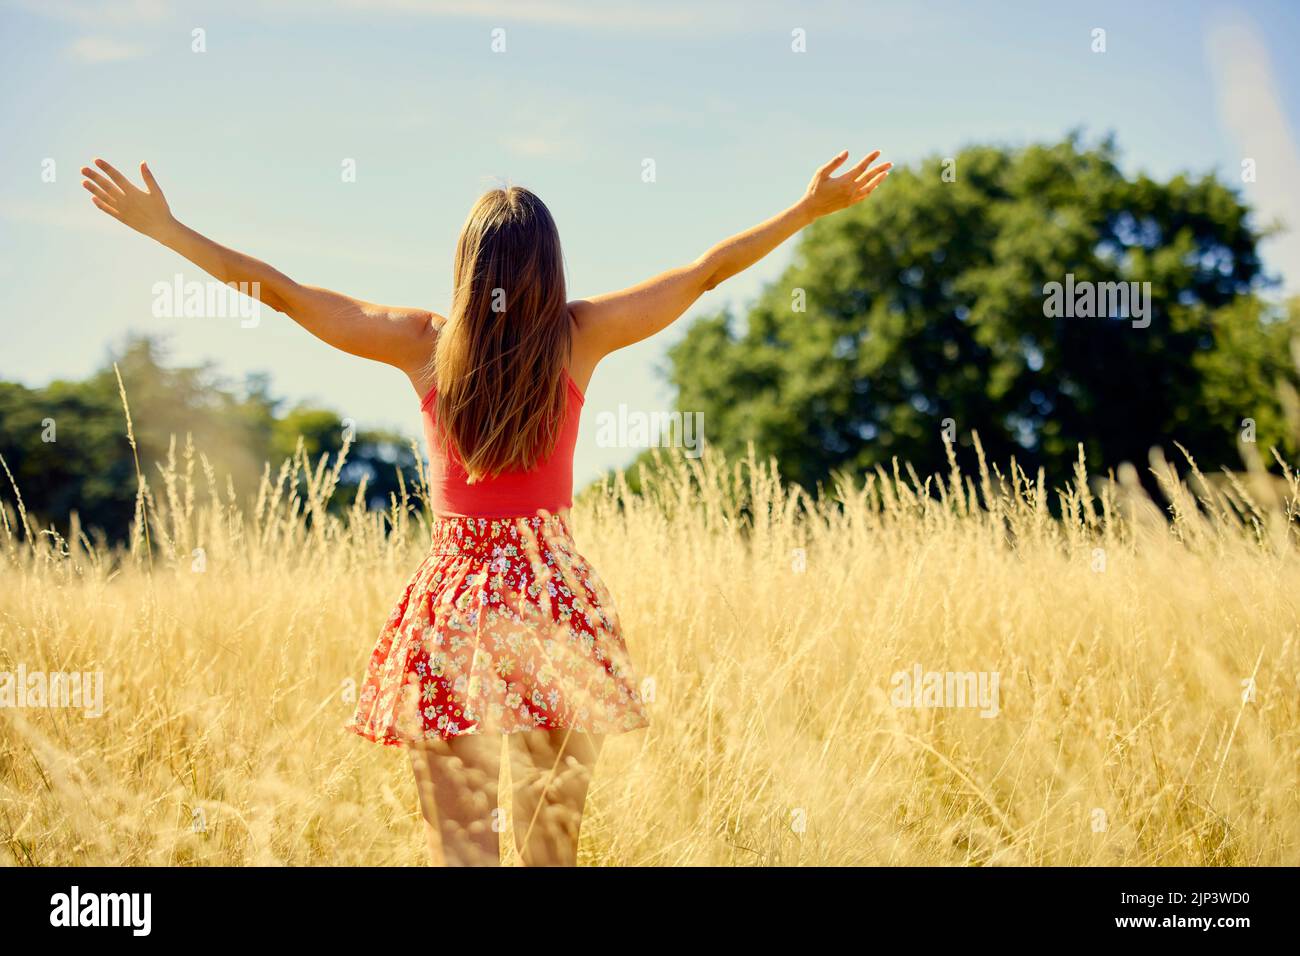 Beautiful Girl walking in field Banque D'Images